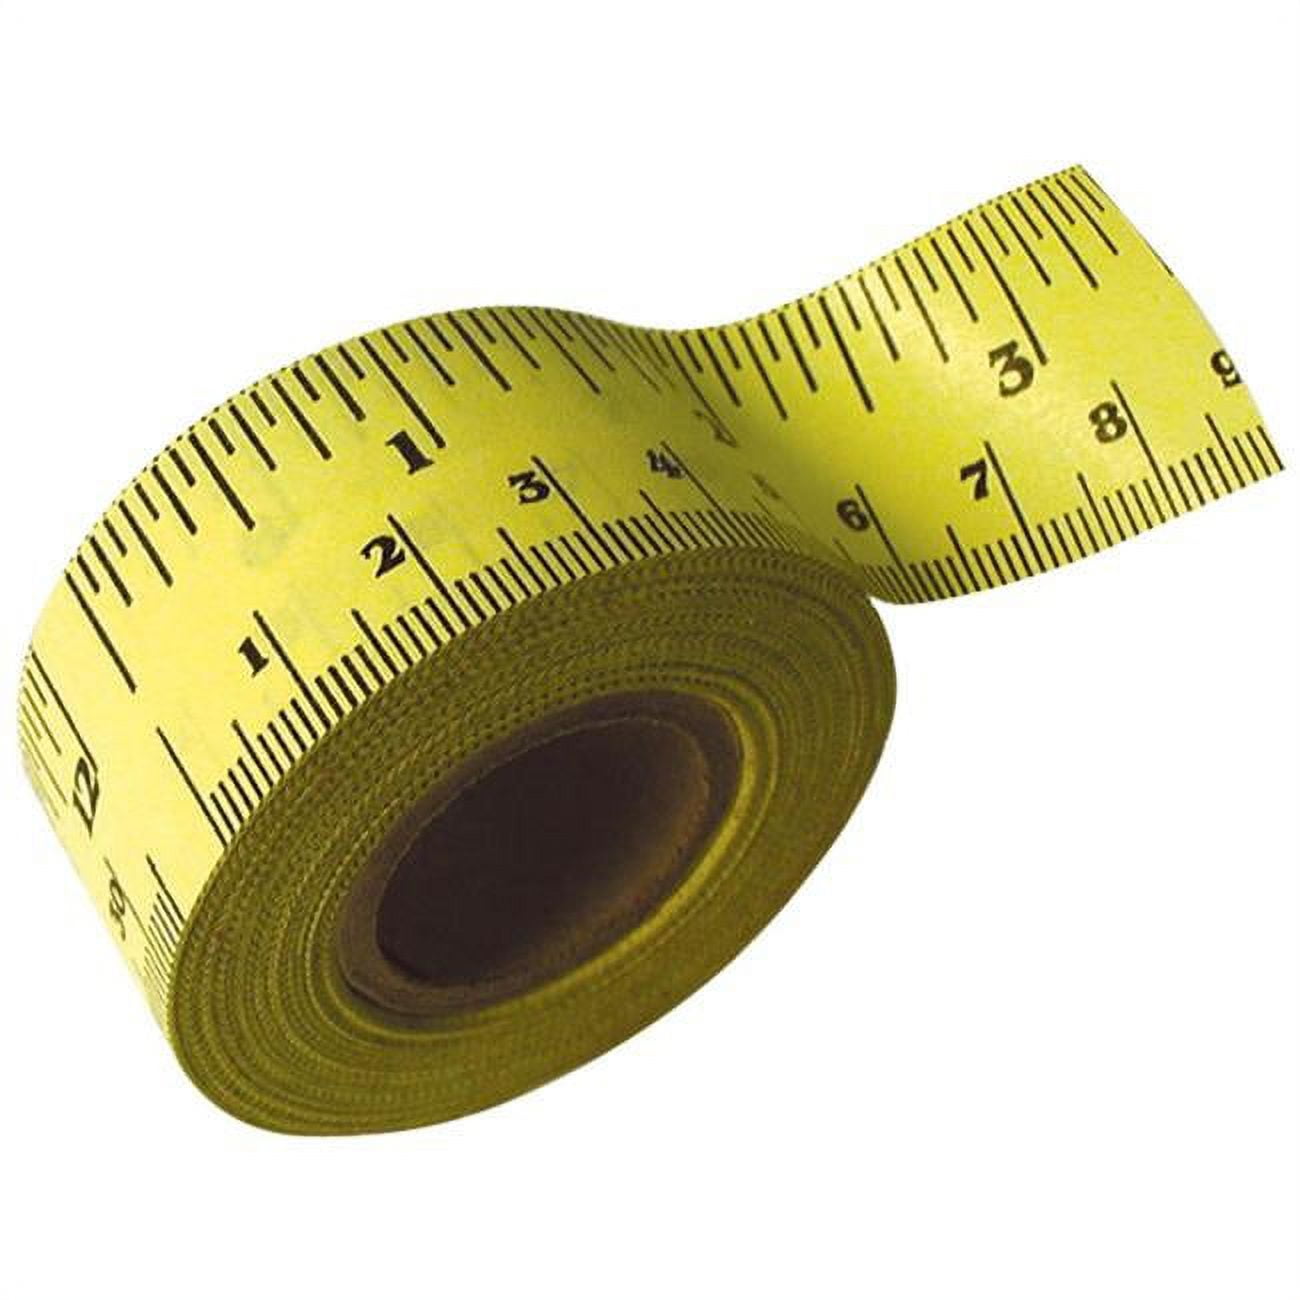 EDSRDRUS 3 Rolls Ruler Tape 1/2, 1, 1-1/2 Inch Repeating 12inch No Gap  Color Imprint, No Residue Masking Tape Measure for Painting, Woodworking,  Sewing & DIY(Yellow) Yellow No Gap-(1/2in+1in+1-1/2in)*67Yard